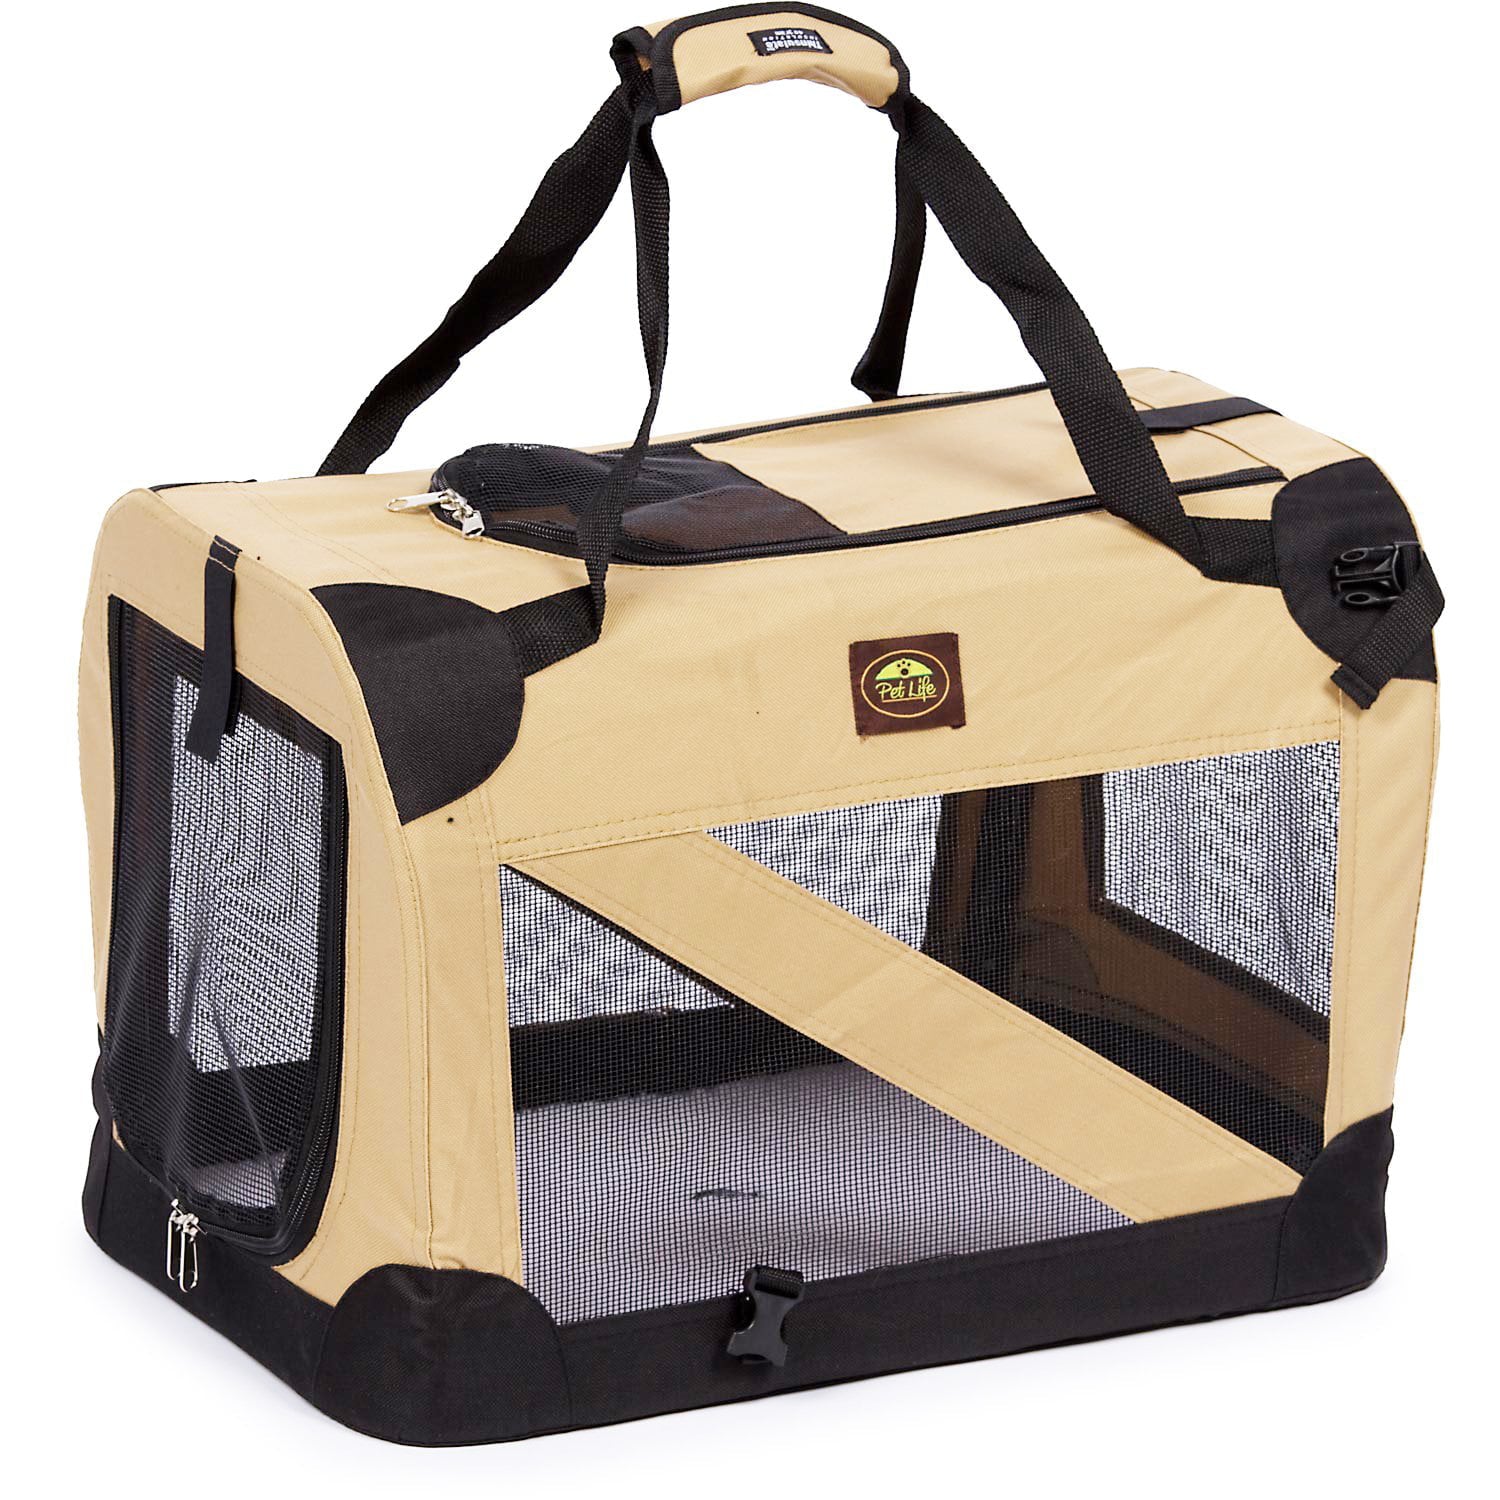 Pet Life ® '360° Vista View' Zippered Soft Folding Collapsible Durable Metal Framed Pet Dog Crate House Carrier